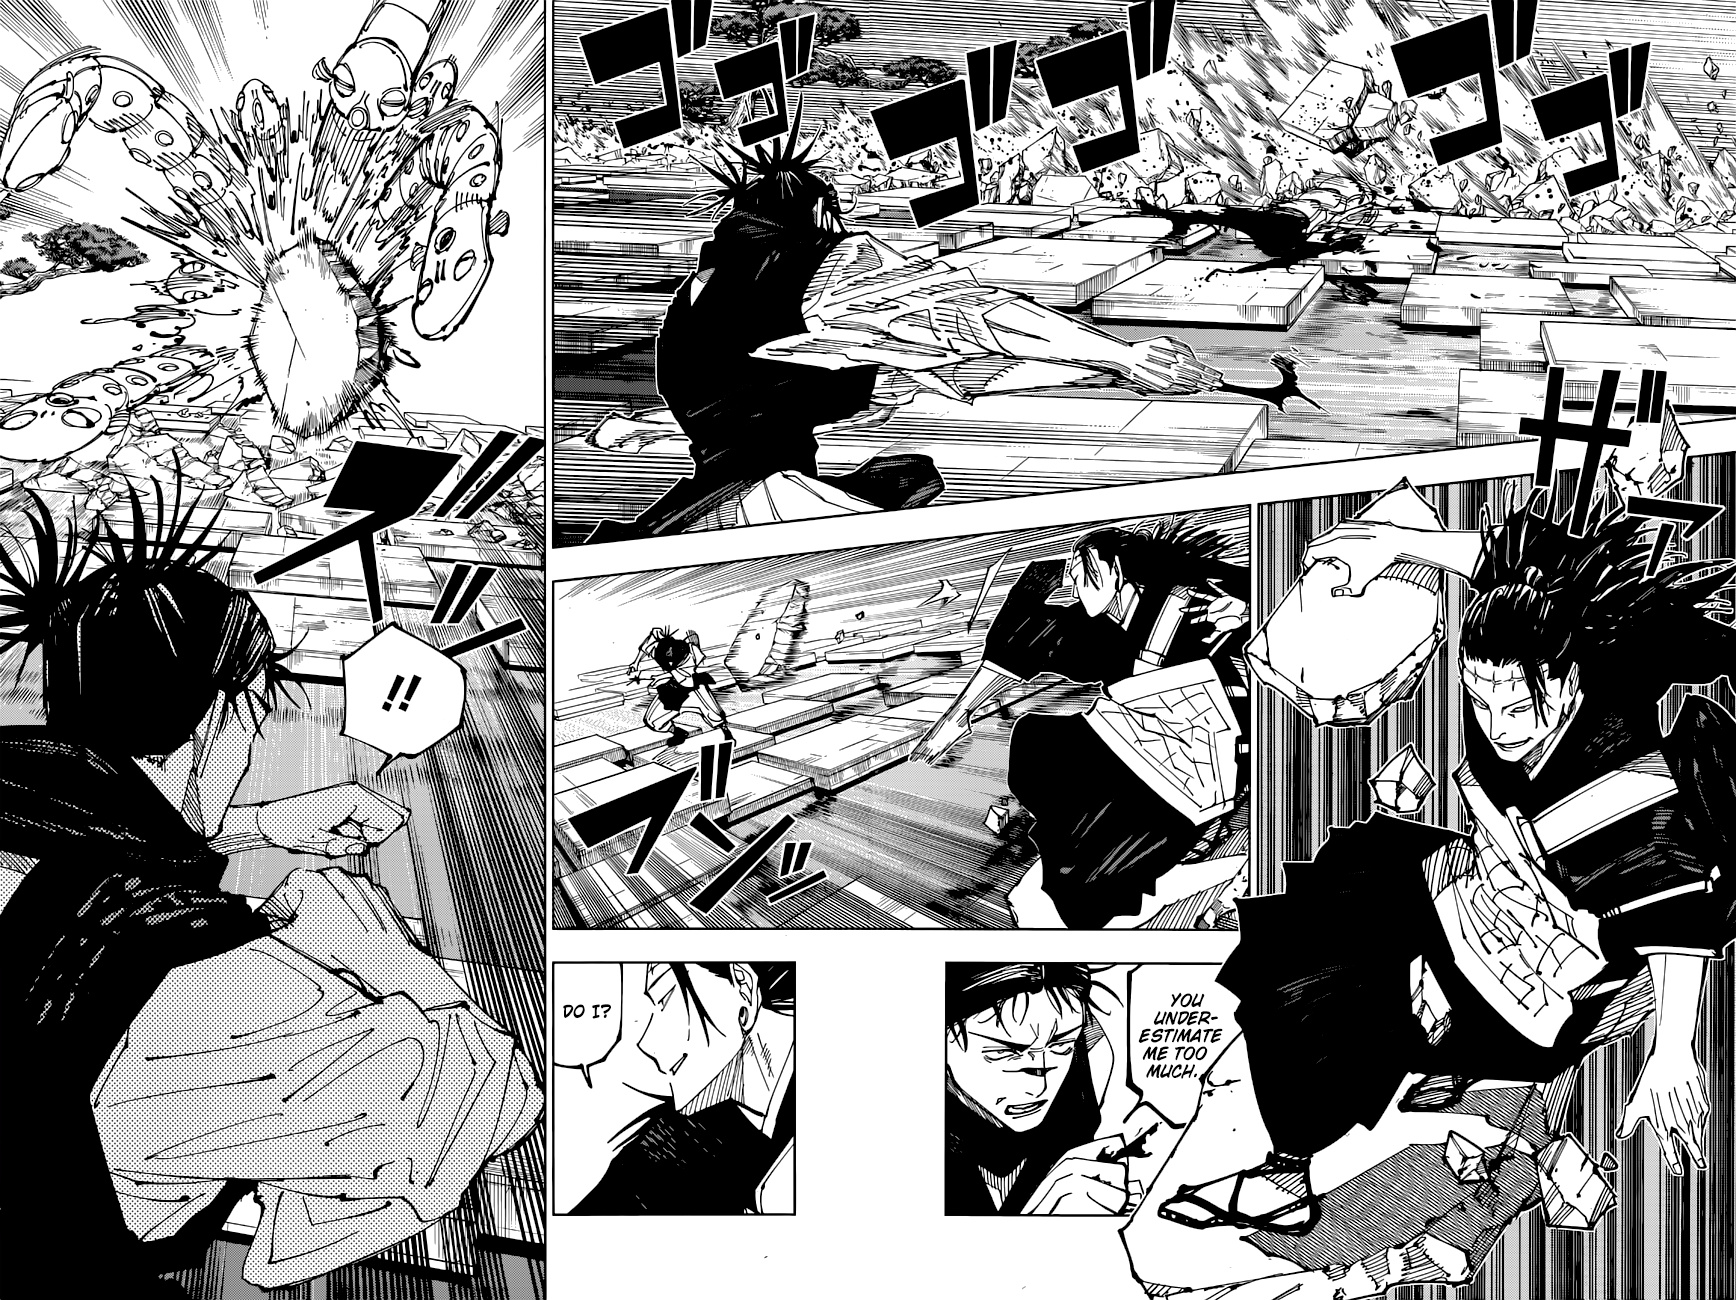 Jujutsu Kaisen, Chapter 203 Blood And Oil ② image 05